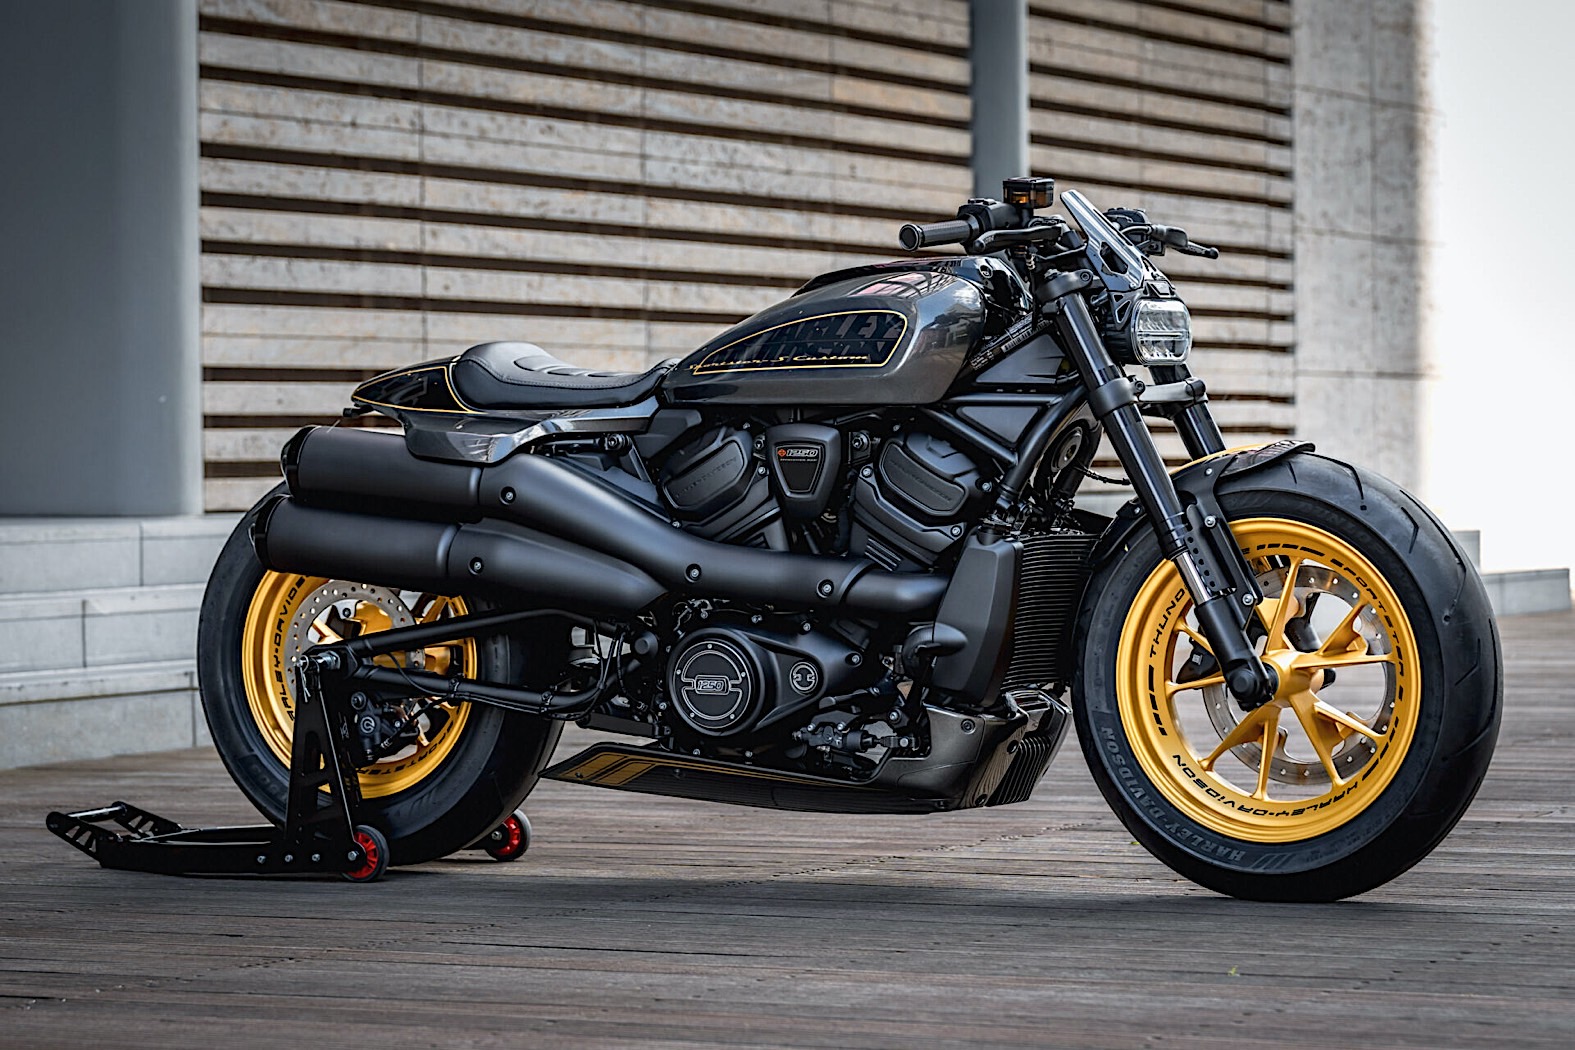 2021 Harley-Davidson Sportster S First Look Review Rider, 58% OFF